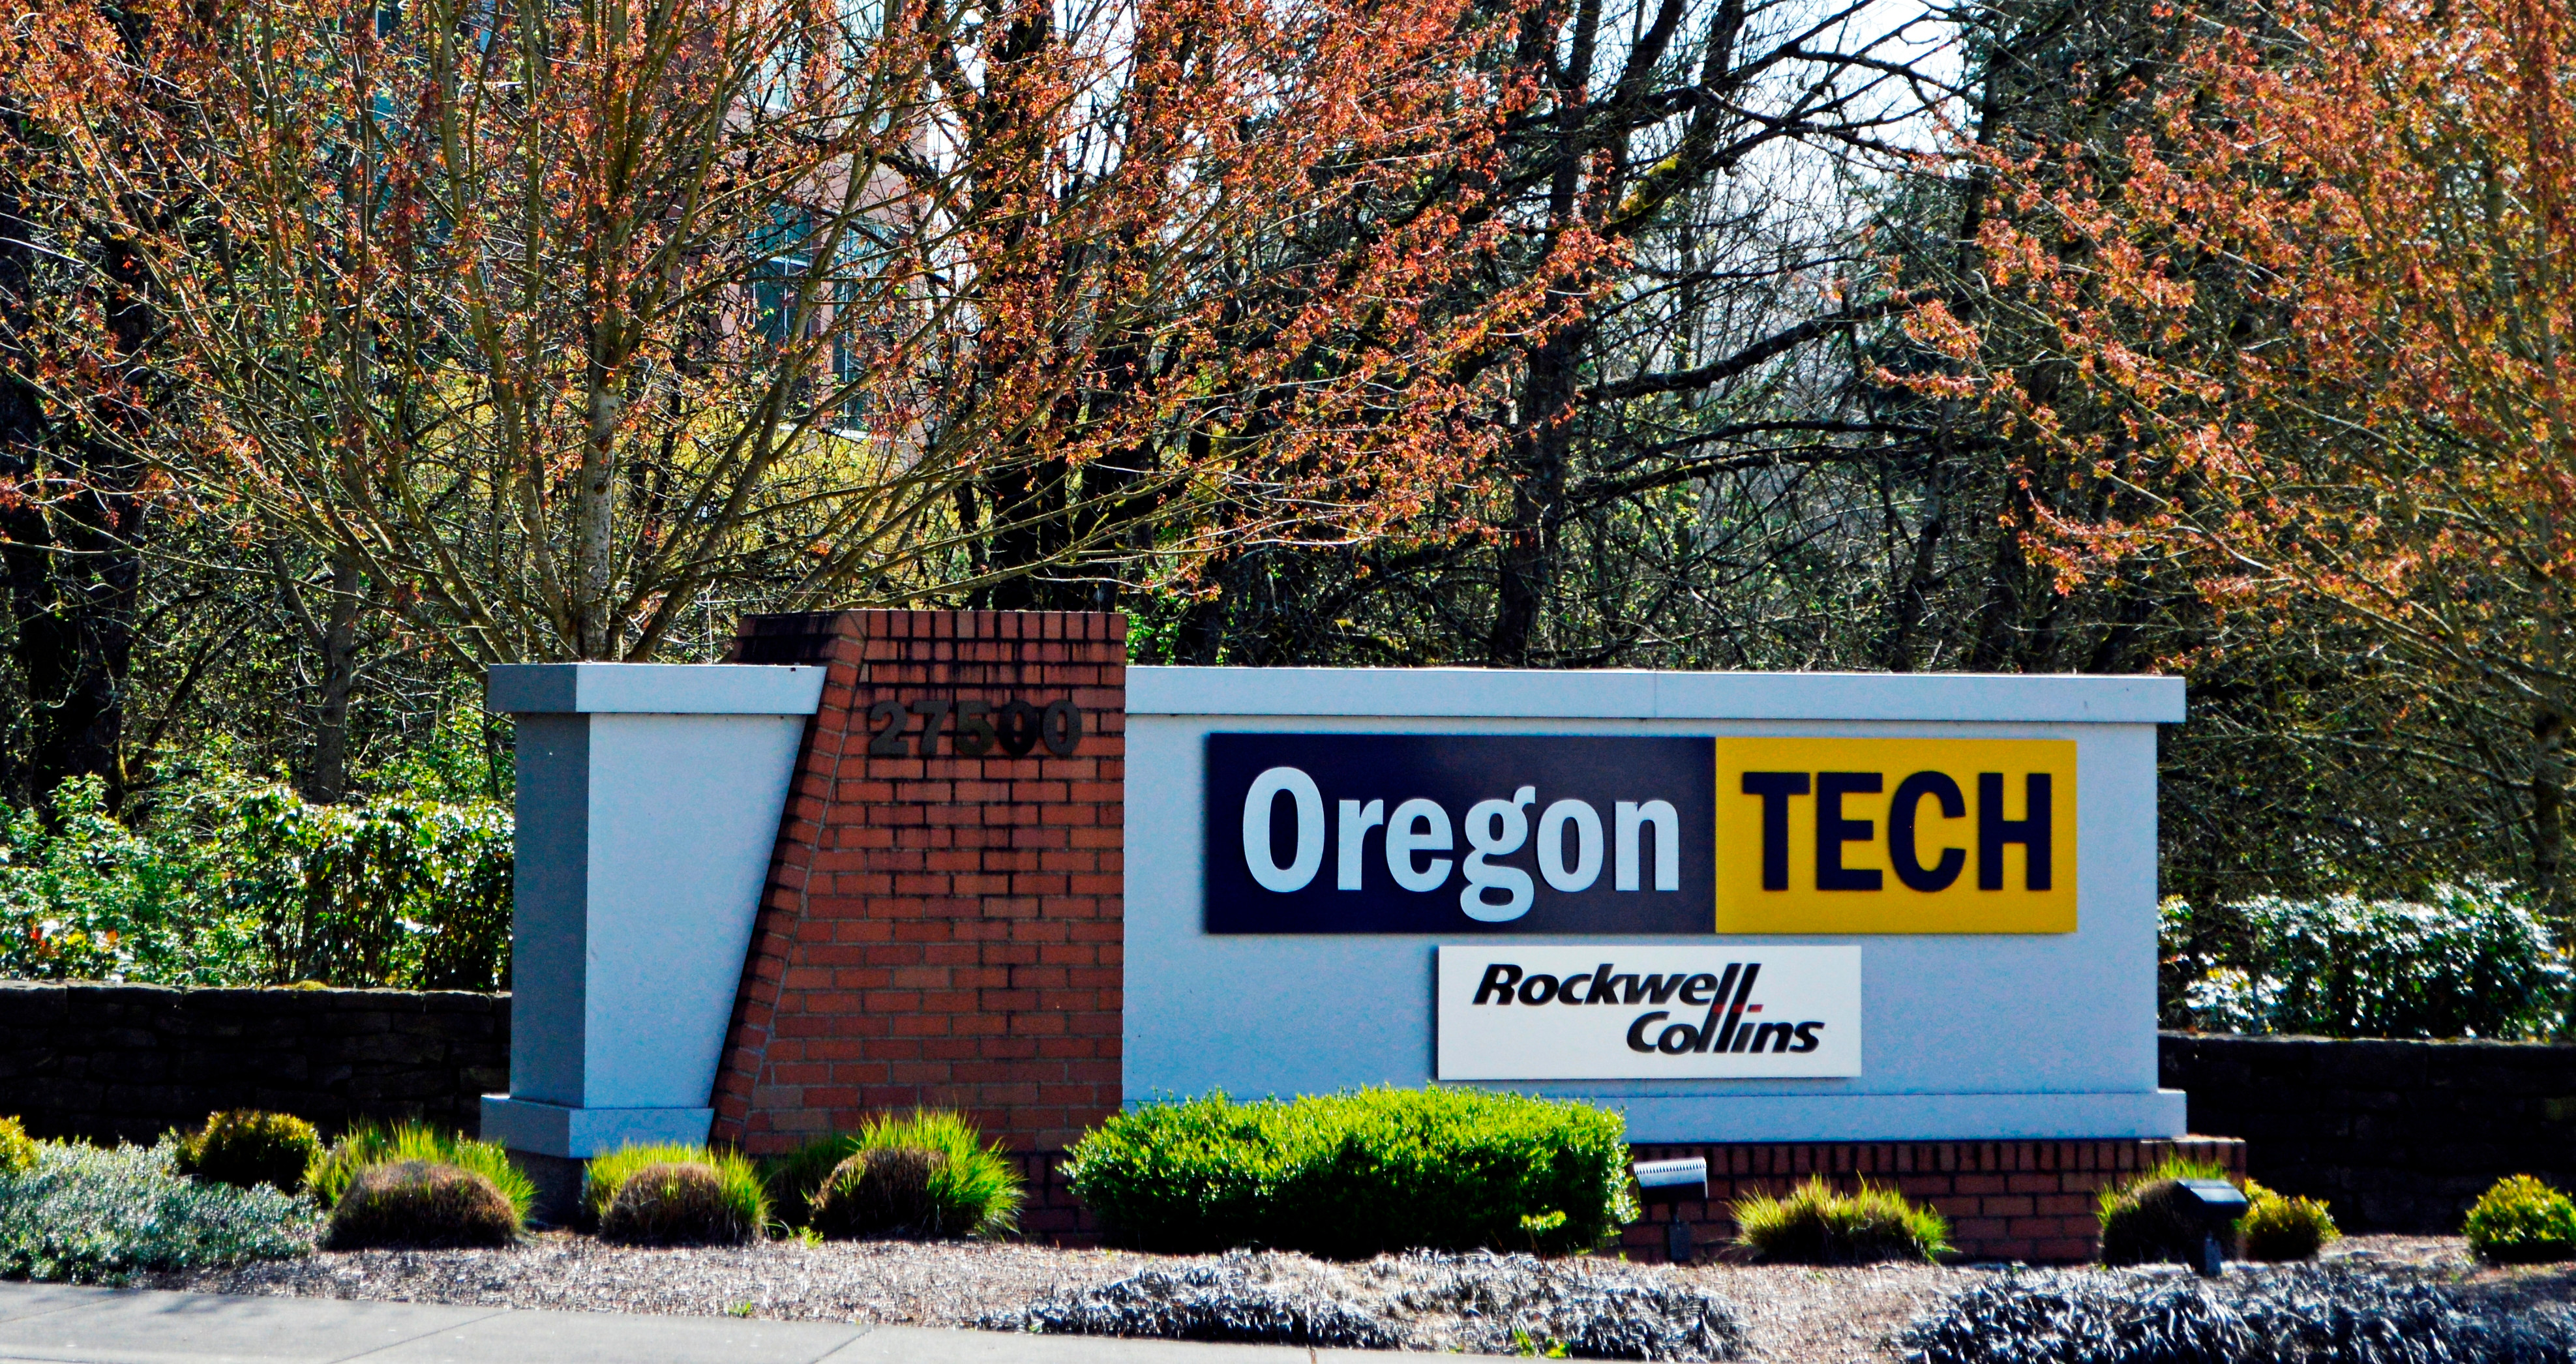 27-oregon-tech-rockwell-collins-wilsonville-oregon-the-kelly-group-real-estate